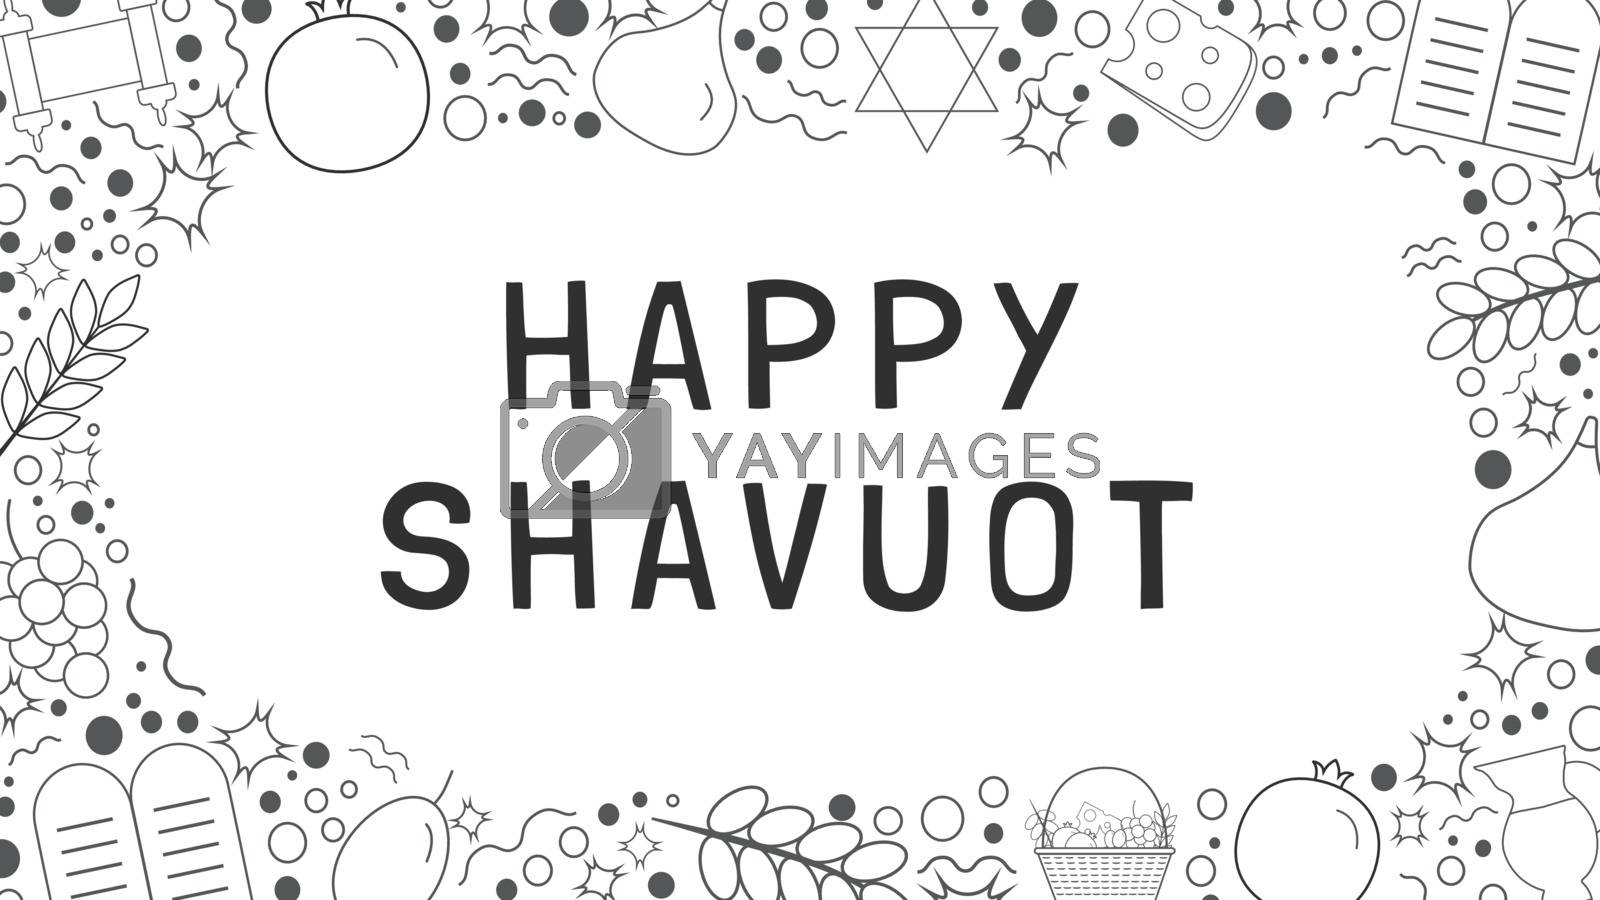 Royalty free image of Frame with Shavuot holiday flat design black thin line icons wit by wavemovies